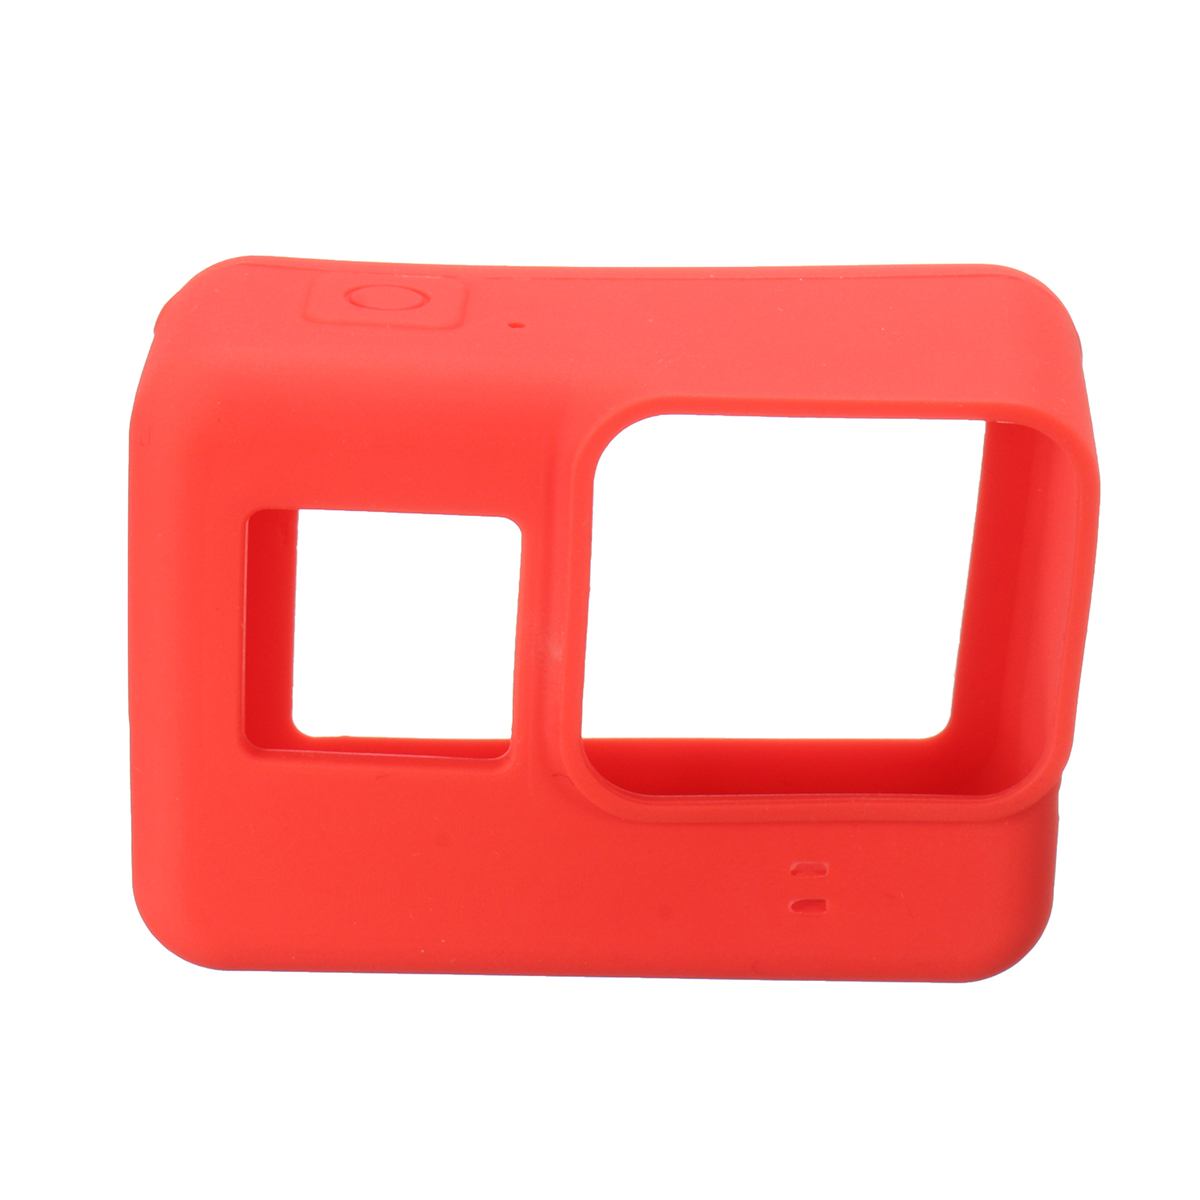 Soft-Silicone-Housing-Case-Protective-Cover-And-Lens-Cap-For-GoPro-Hero-5-Camera-1109058-4